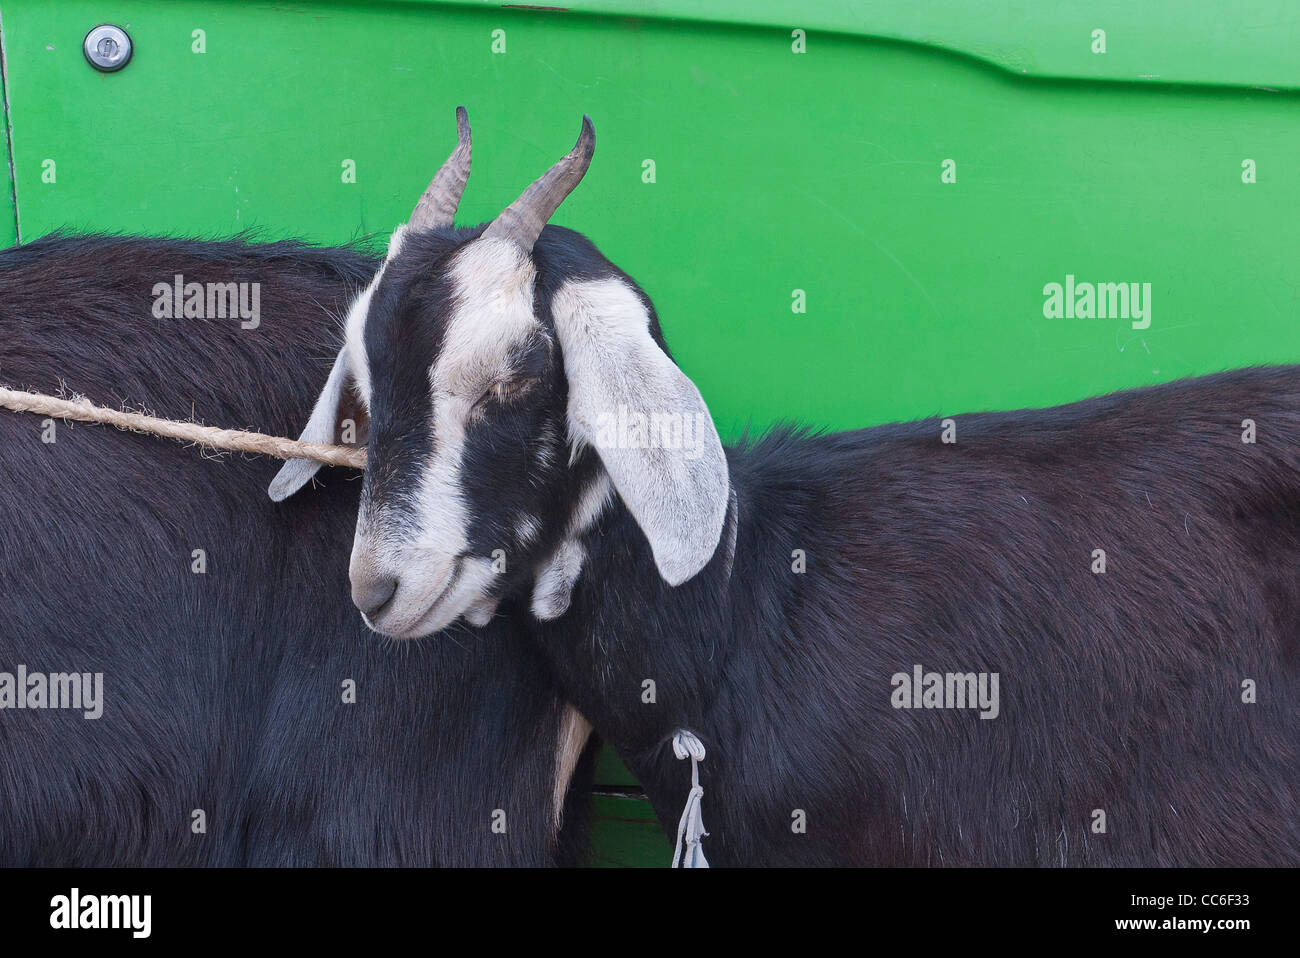 A black and white billy goat with long horns is leashed while standing in front of a bright green pickup truck. Stock Photo